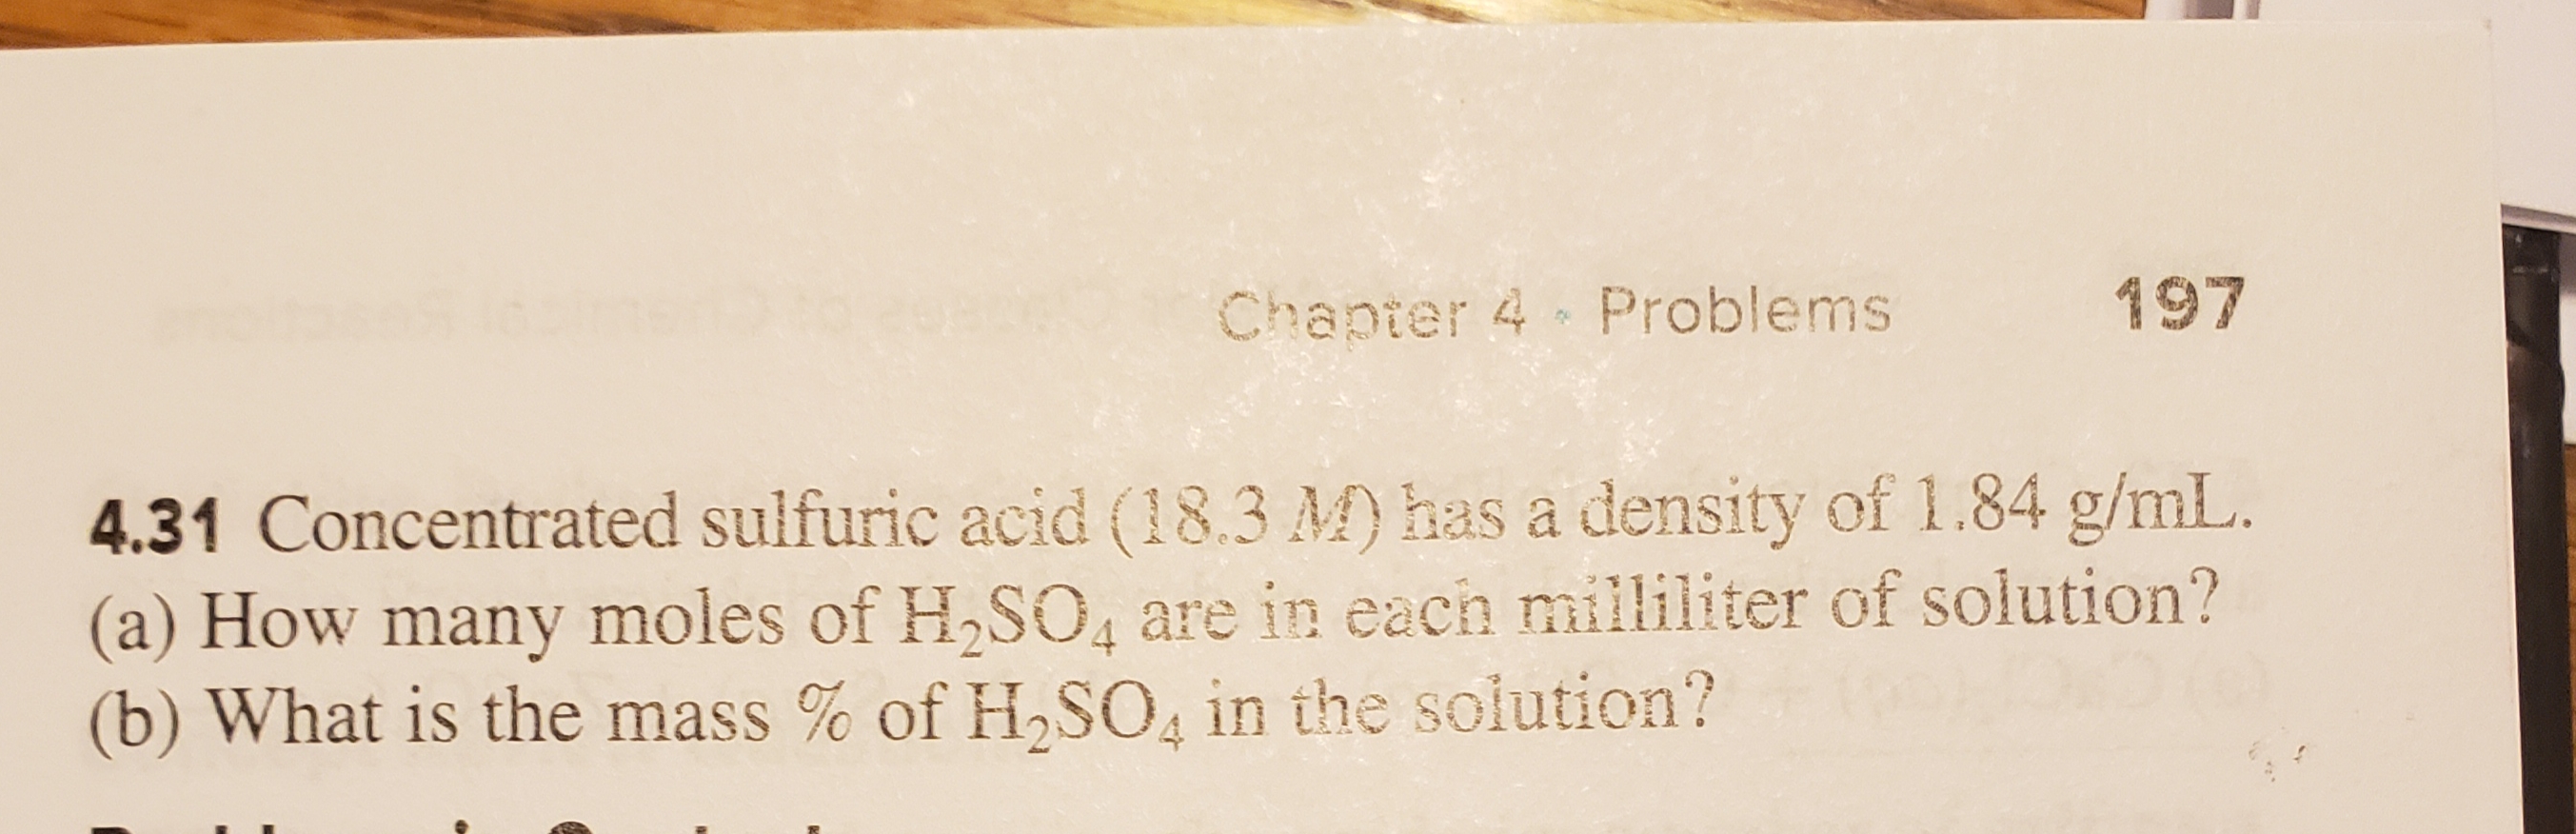 197
Chapter 4 Problems
4.31 Concentrated sulfuric acid (18.3 M) has a density of 1.84 g/mL.
(a) How many moles of H2SO, are in each milliliter of solution?
(b) What is the mass% of H SO in the solution?
